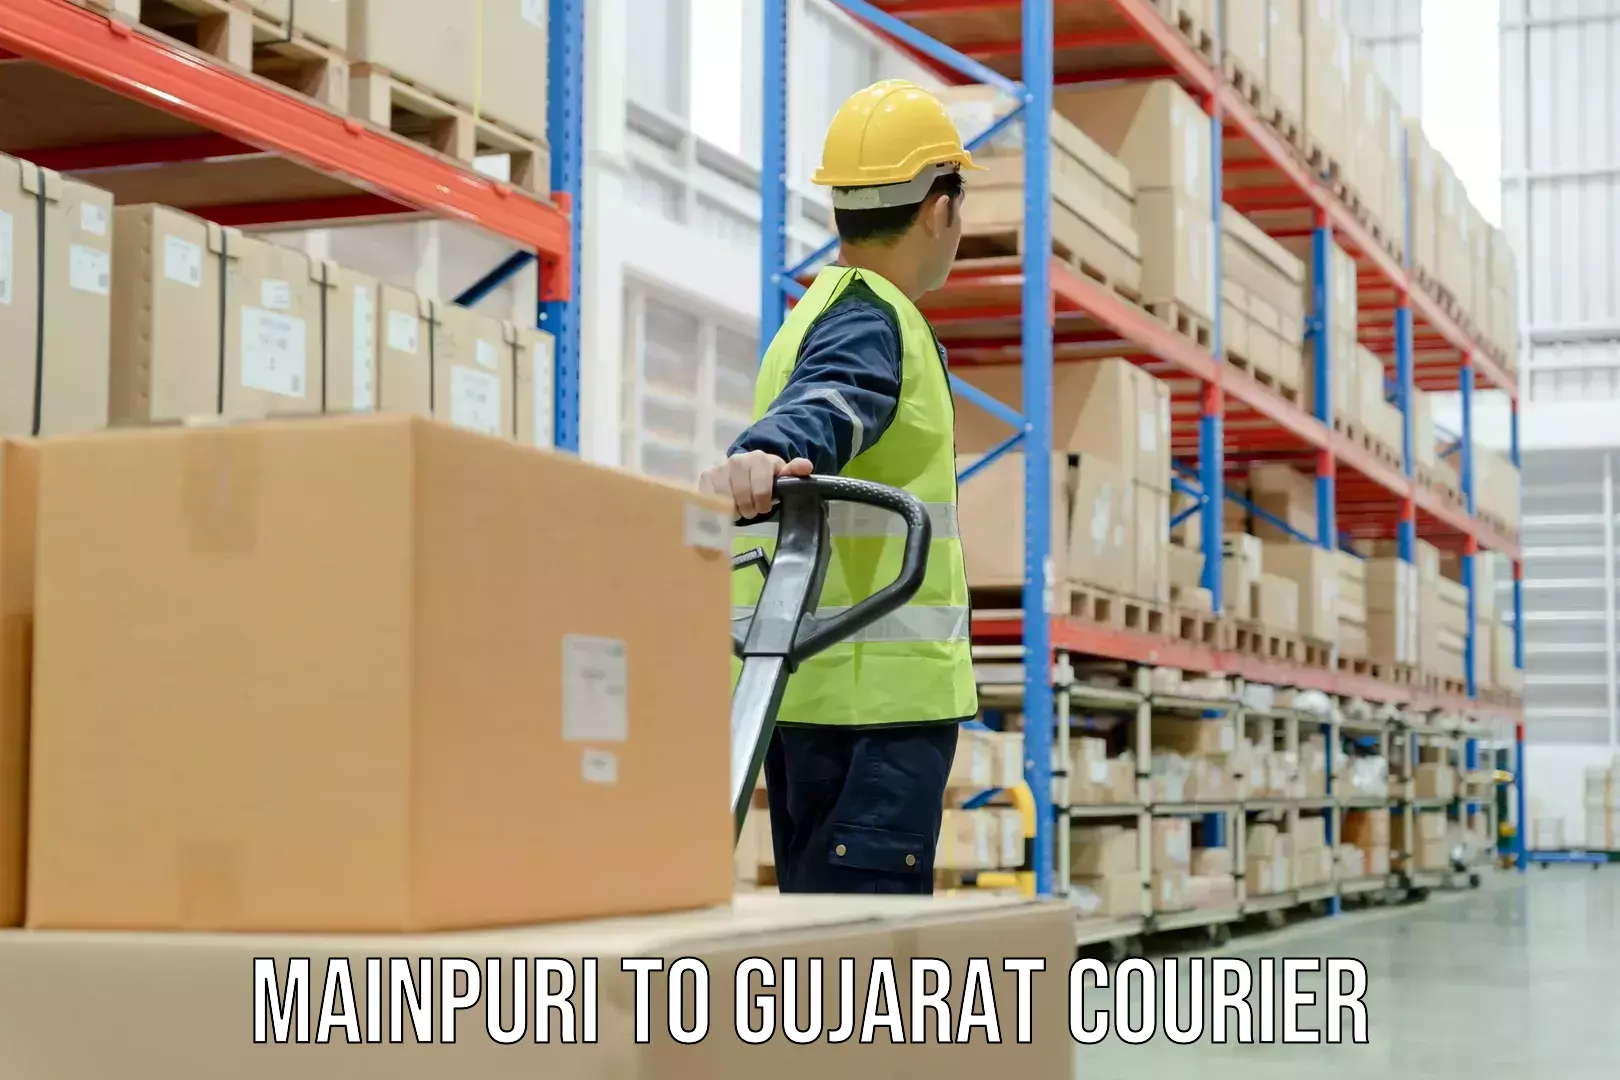 Global courier networks Mainpuri to Gujarat